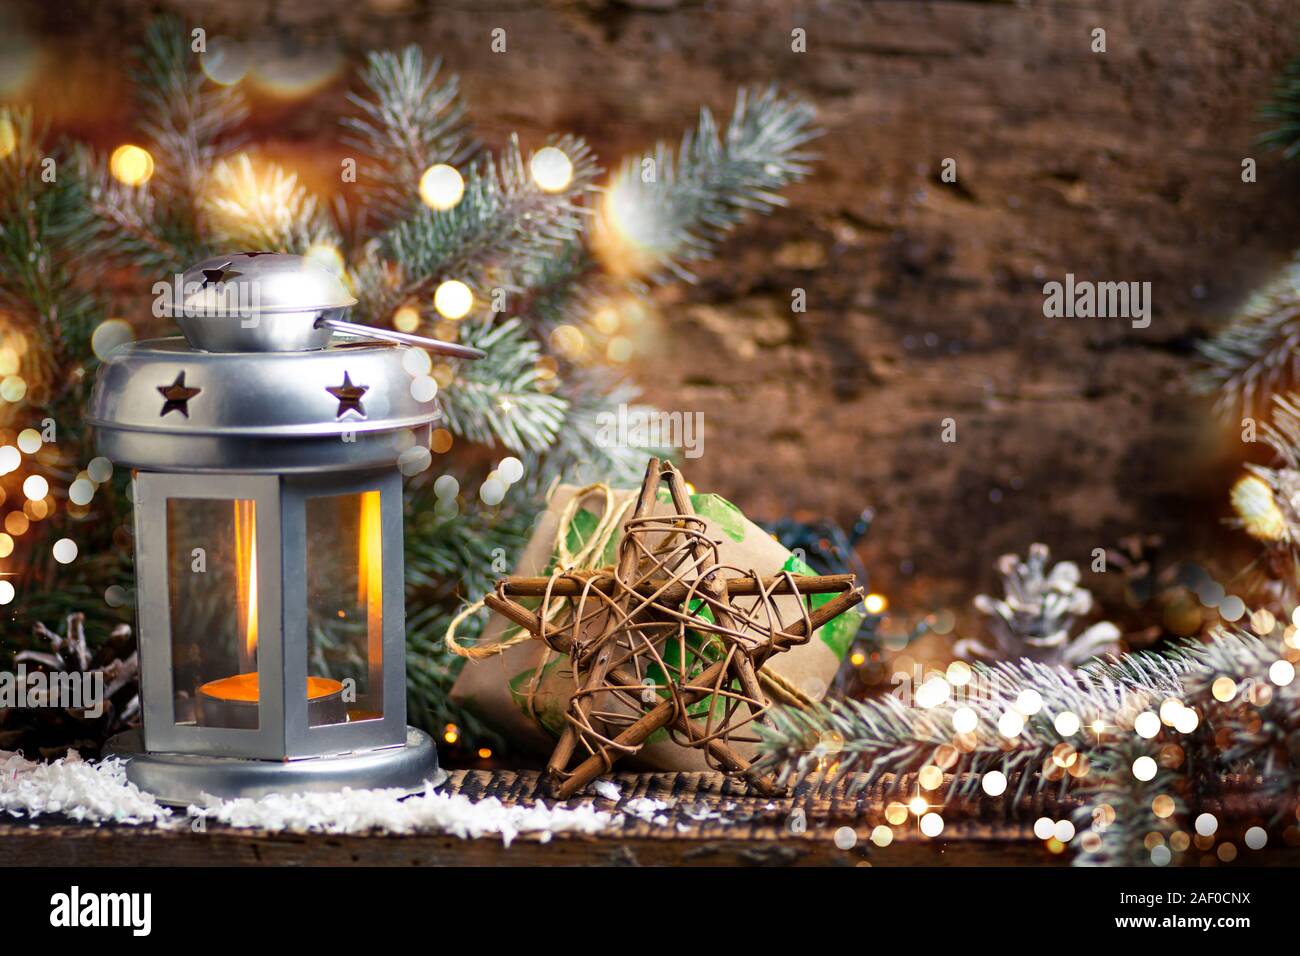 Festive lantern and Christmas decorations home arrangement with rustic background Stock Photo